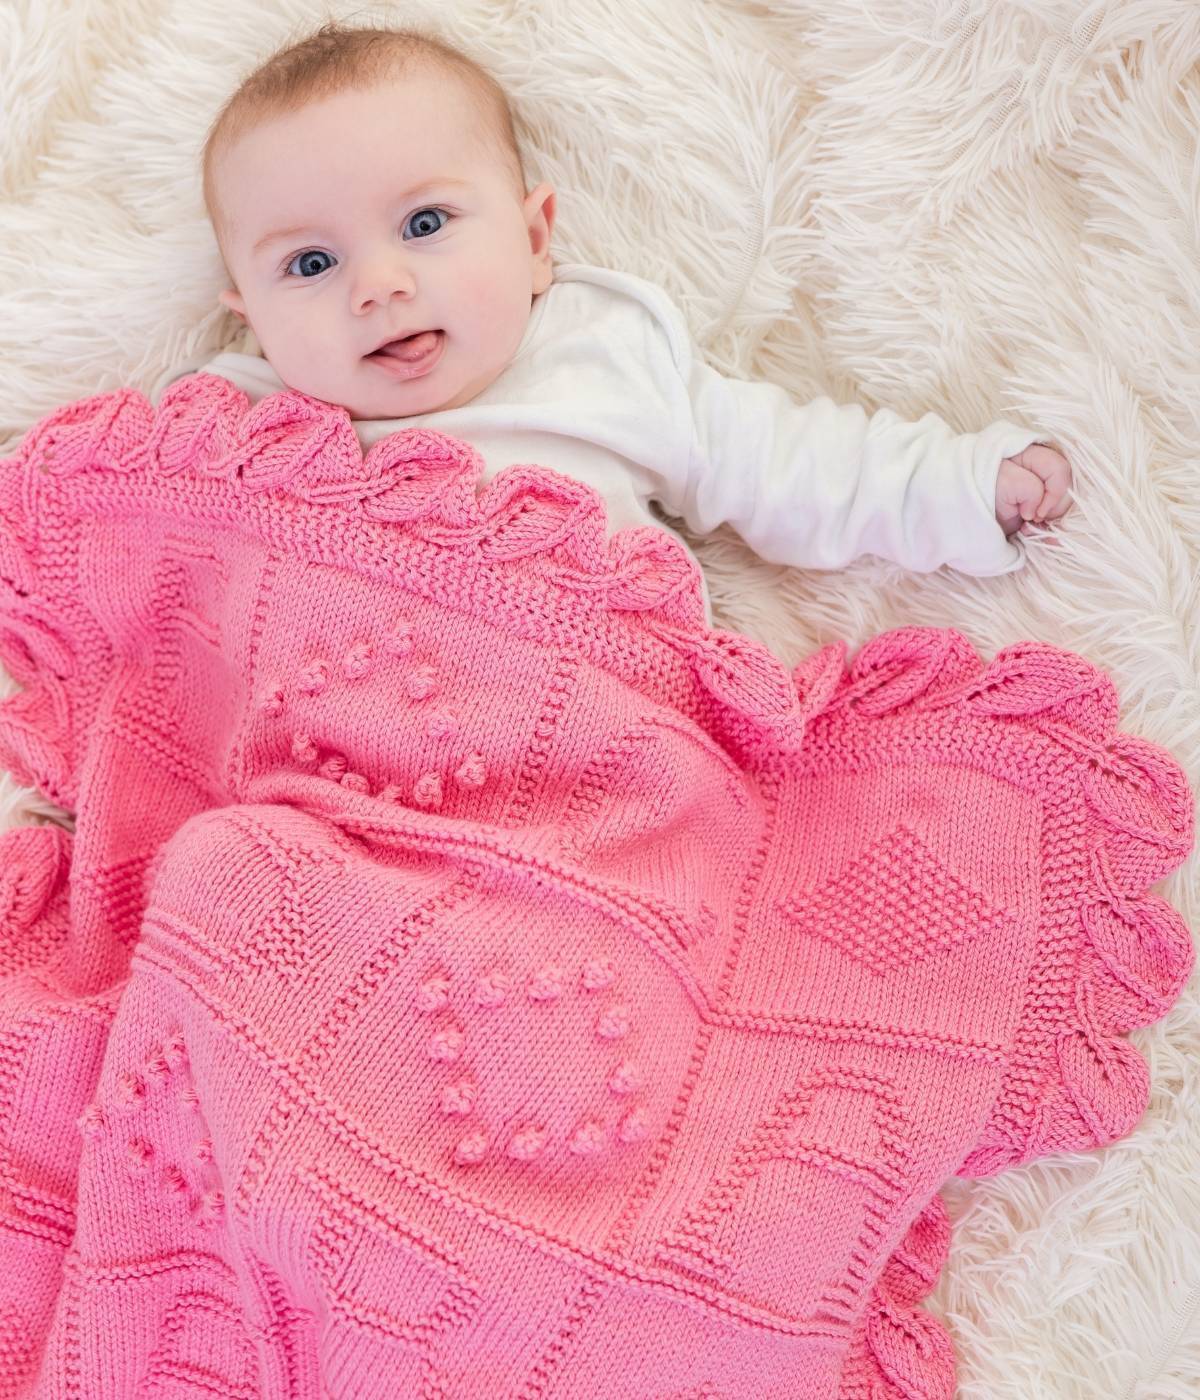 ABC Cot Blanket in Emu Cotton DK (3010) | The Knitting Network